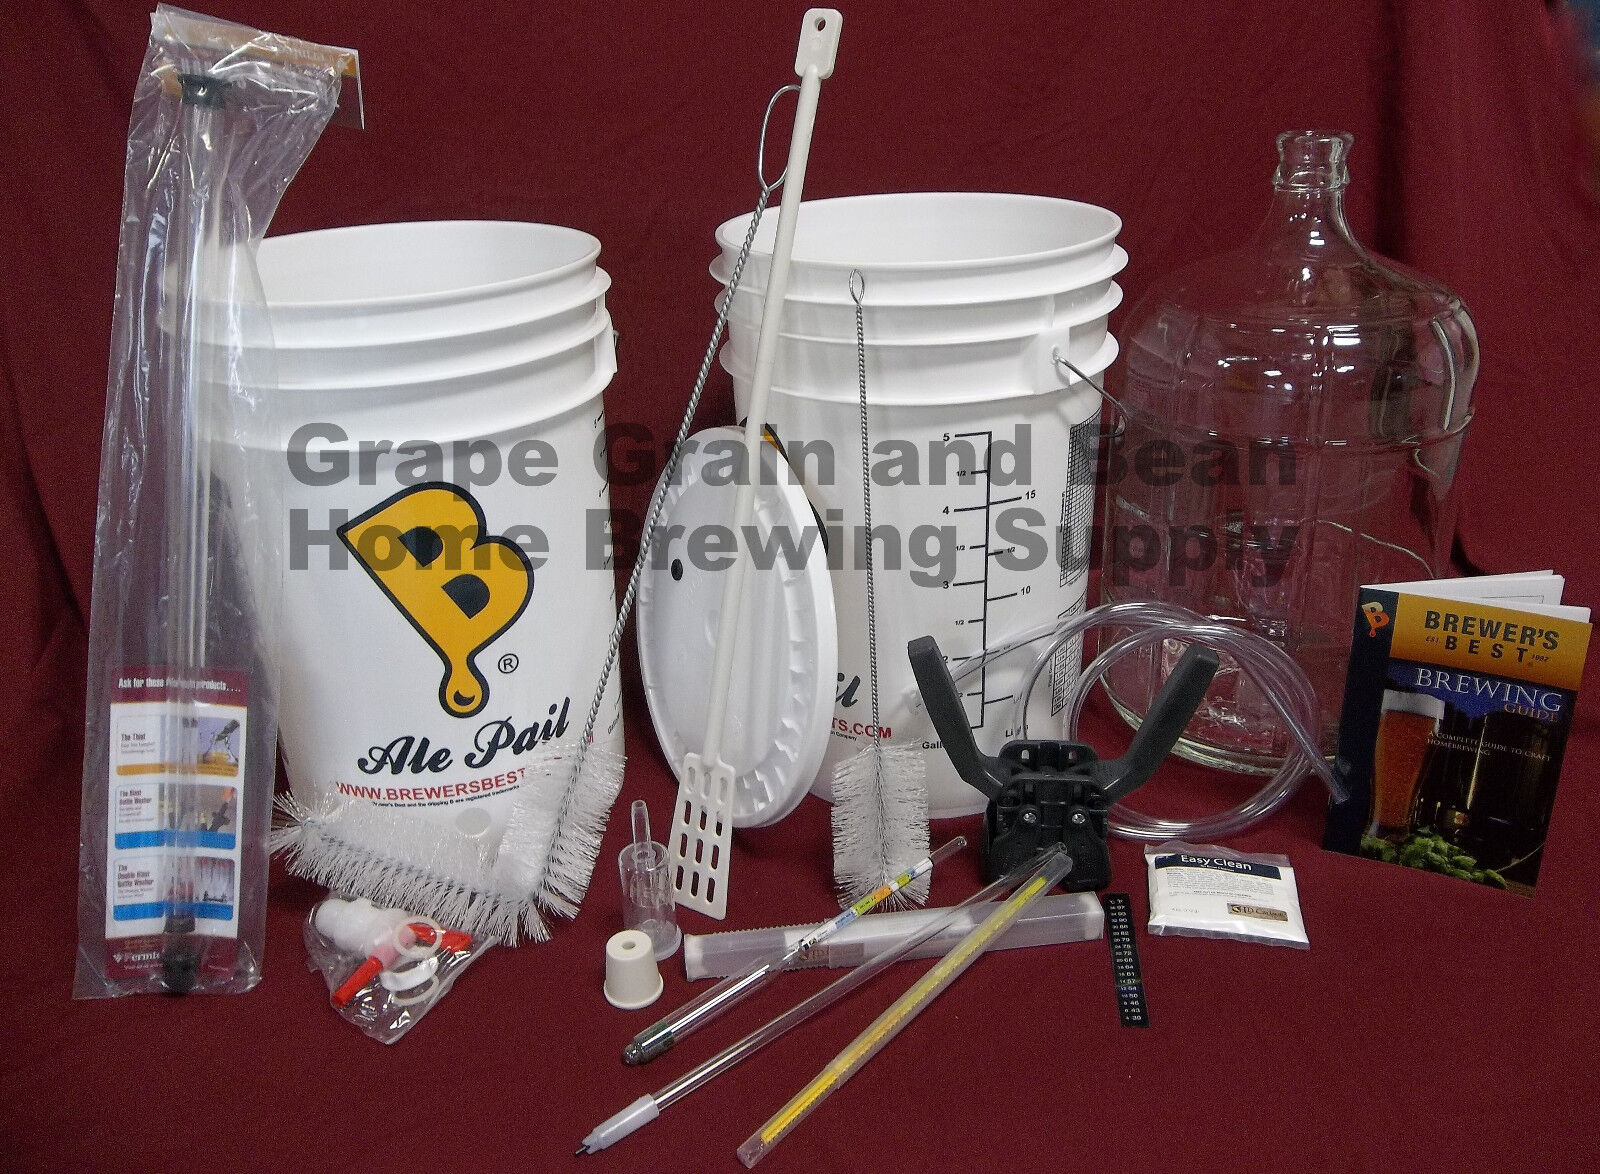 Deluxe Brewers Best Home Brewing Equipment Kit, Beer Making Kit, Brewing Kit